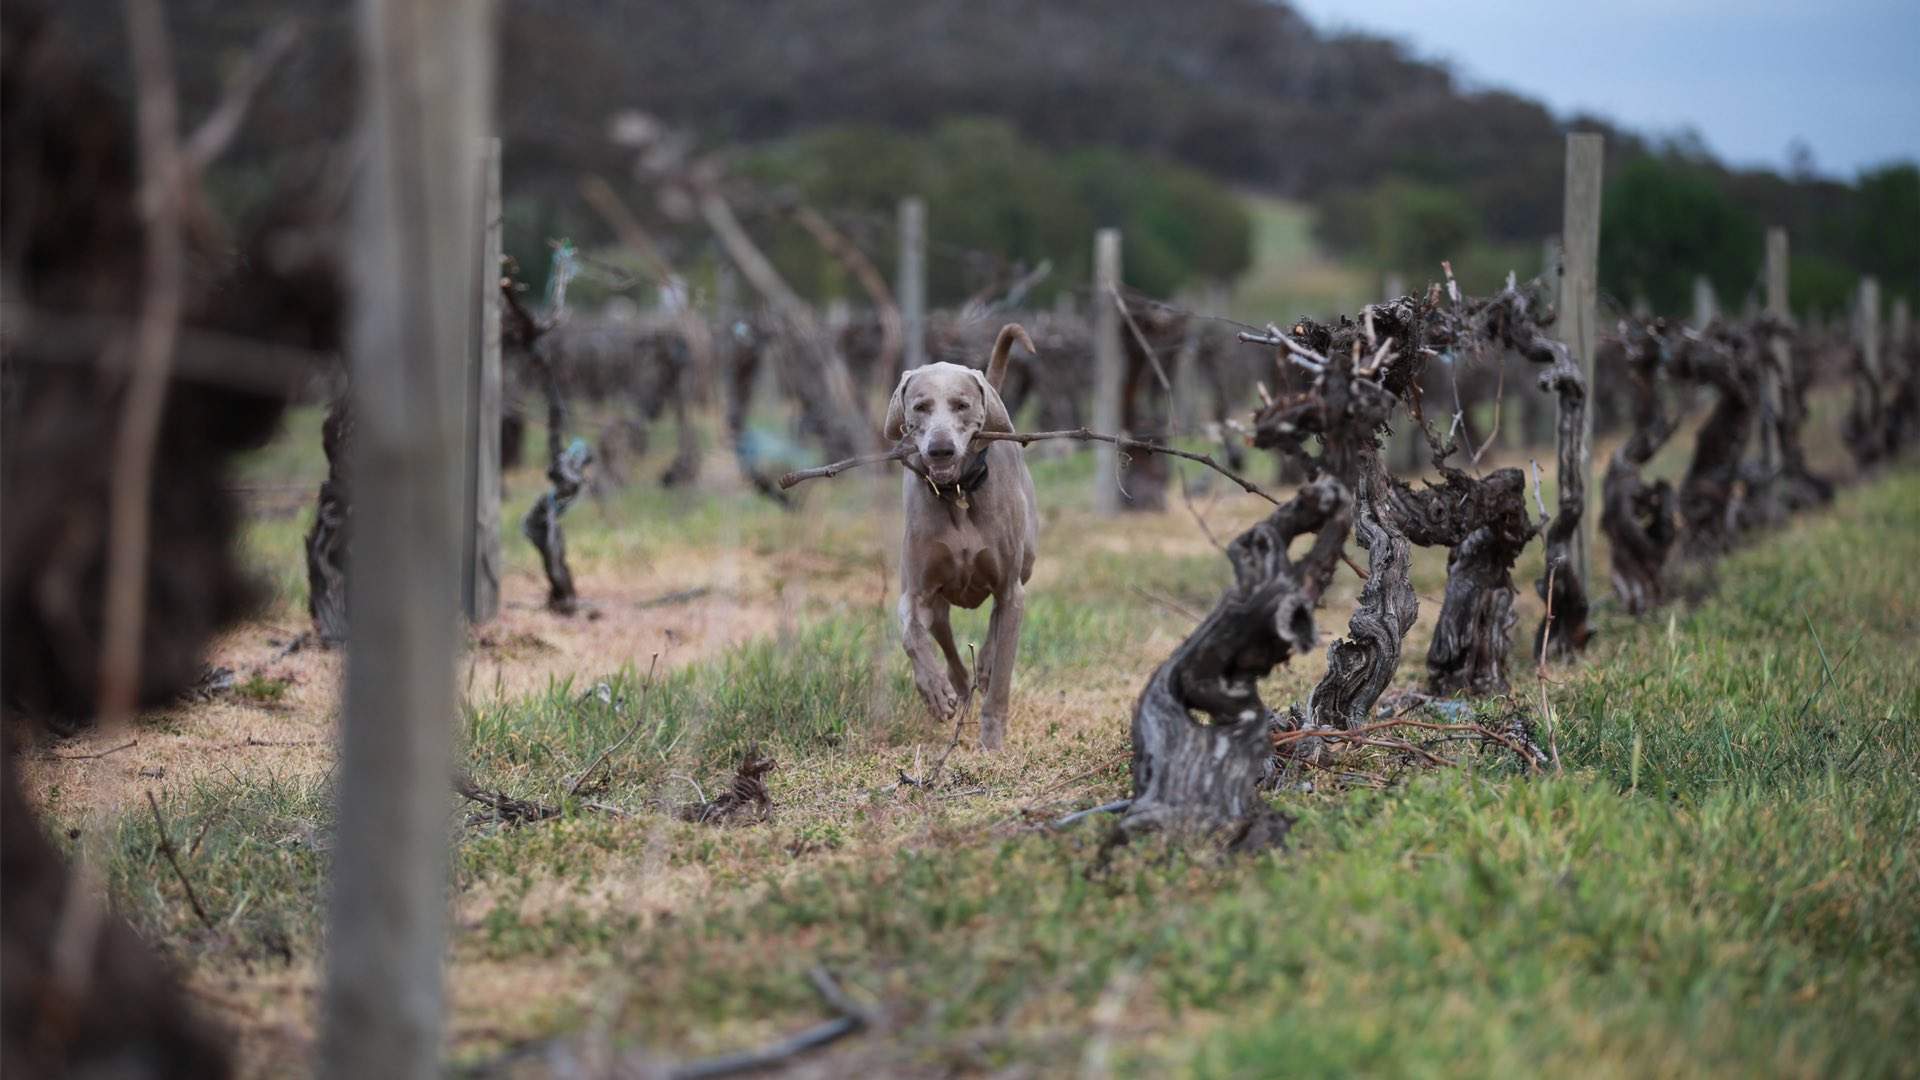 Visit Victoria Has Created a Slightly Ridiculous Tourism Ad Encouraging Dogs to Go on Holiday